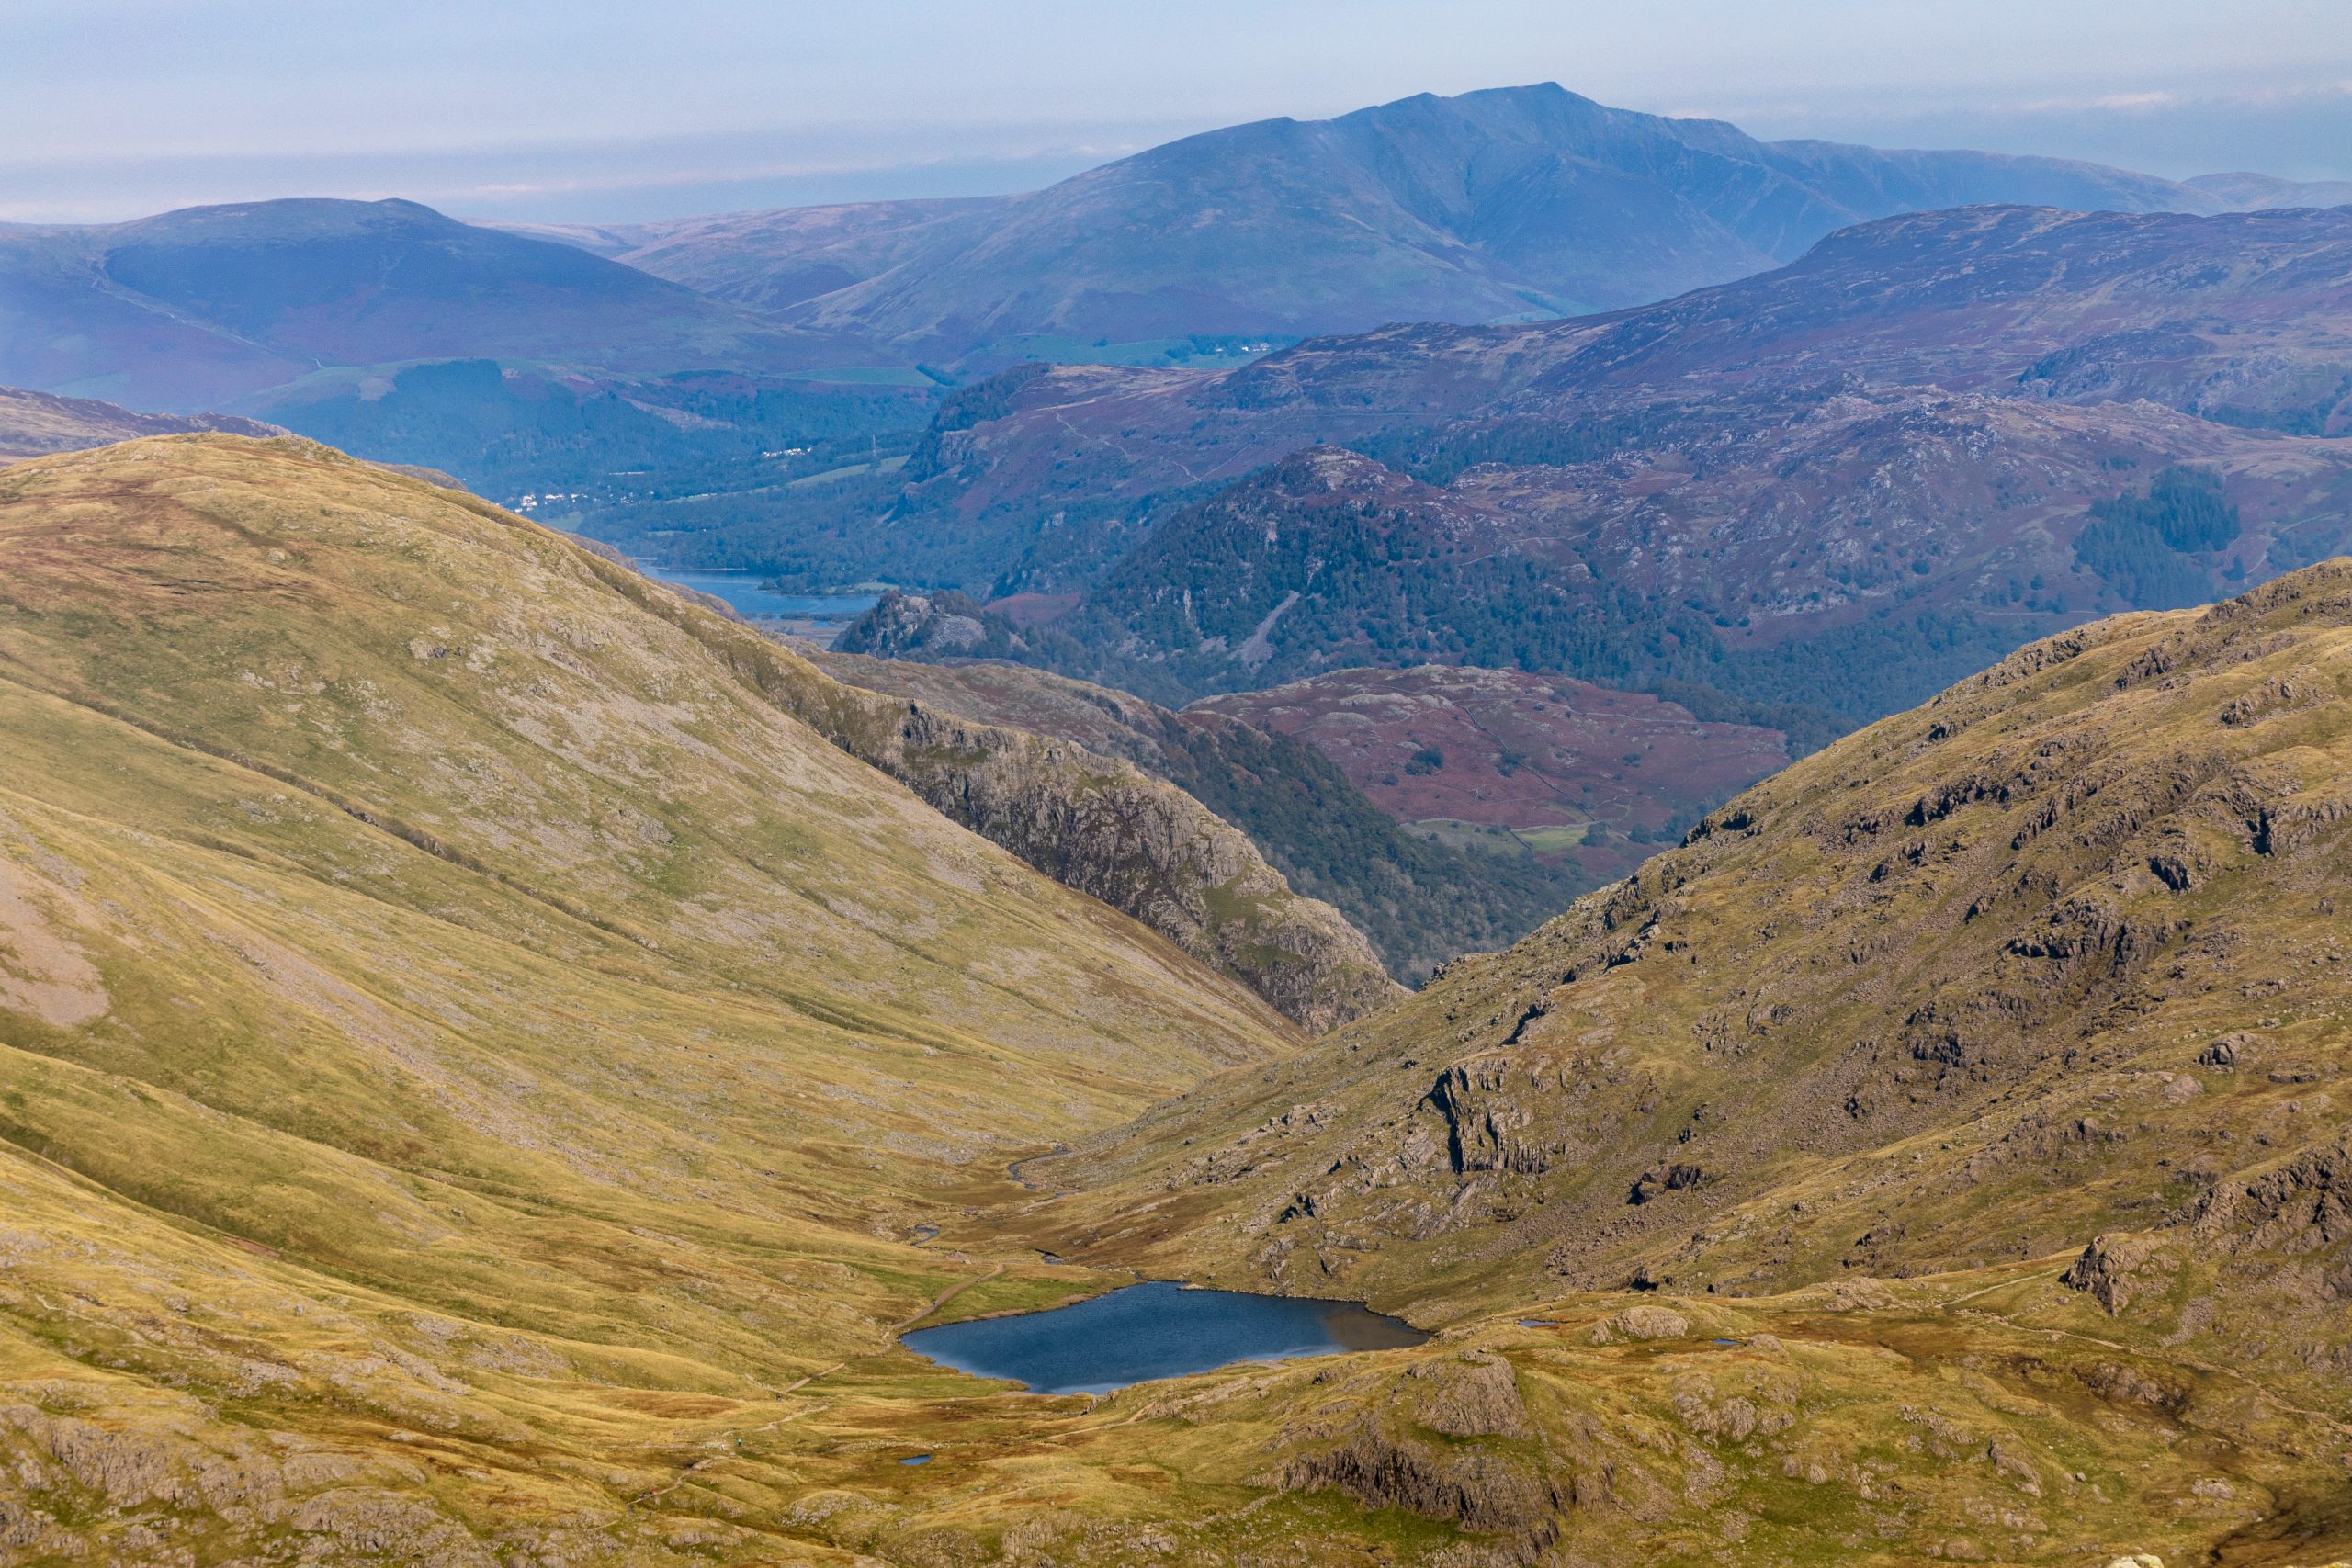 Looking over Styhead Tarn with Derwent Water and Blencathra visible in the distance